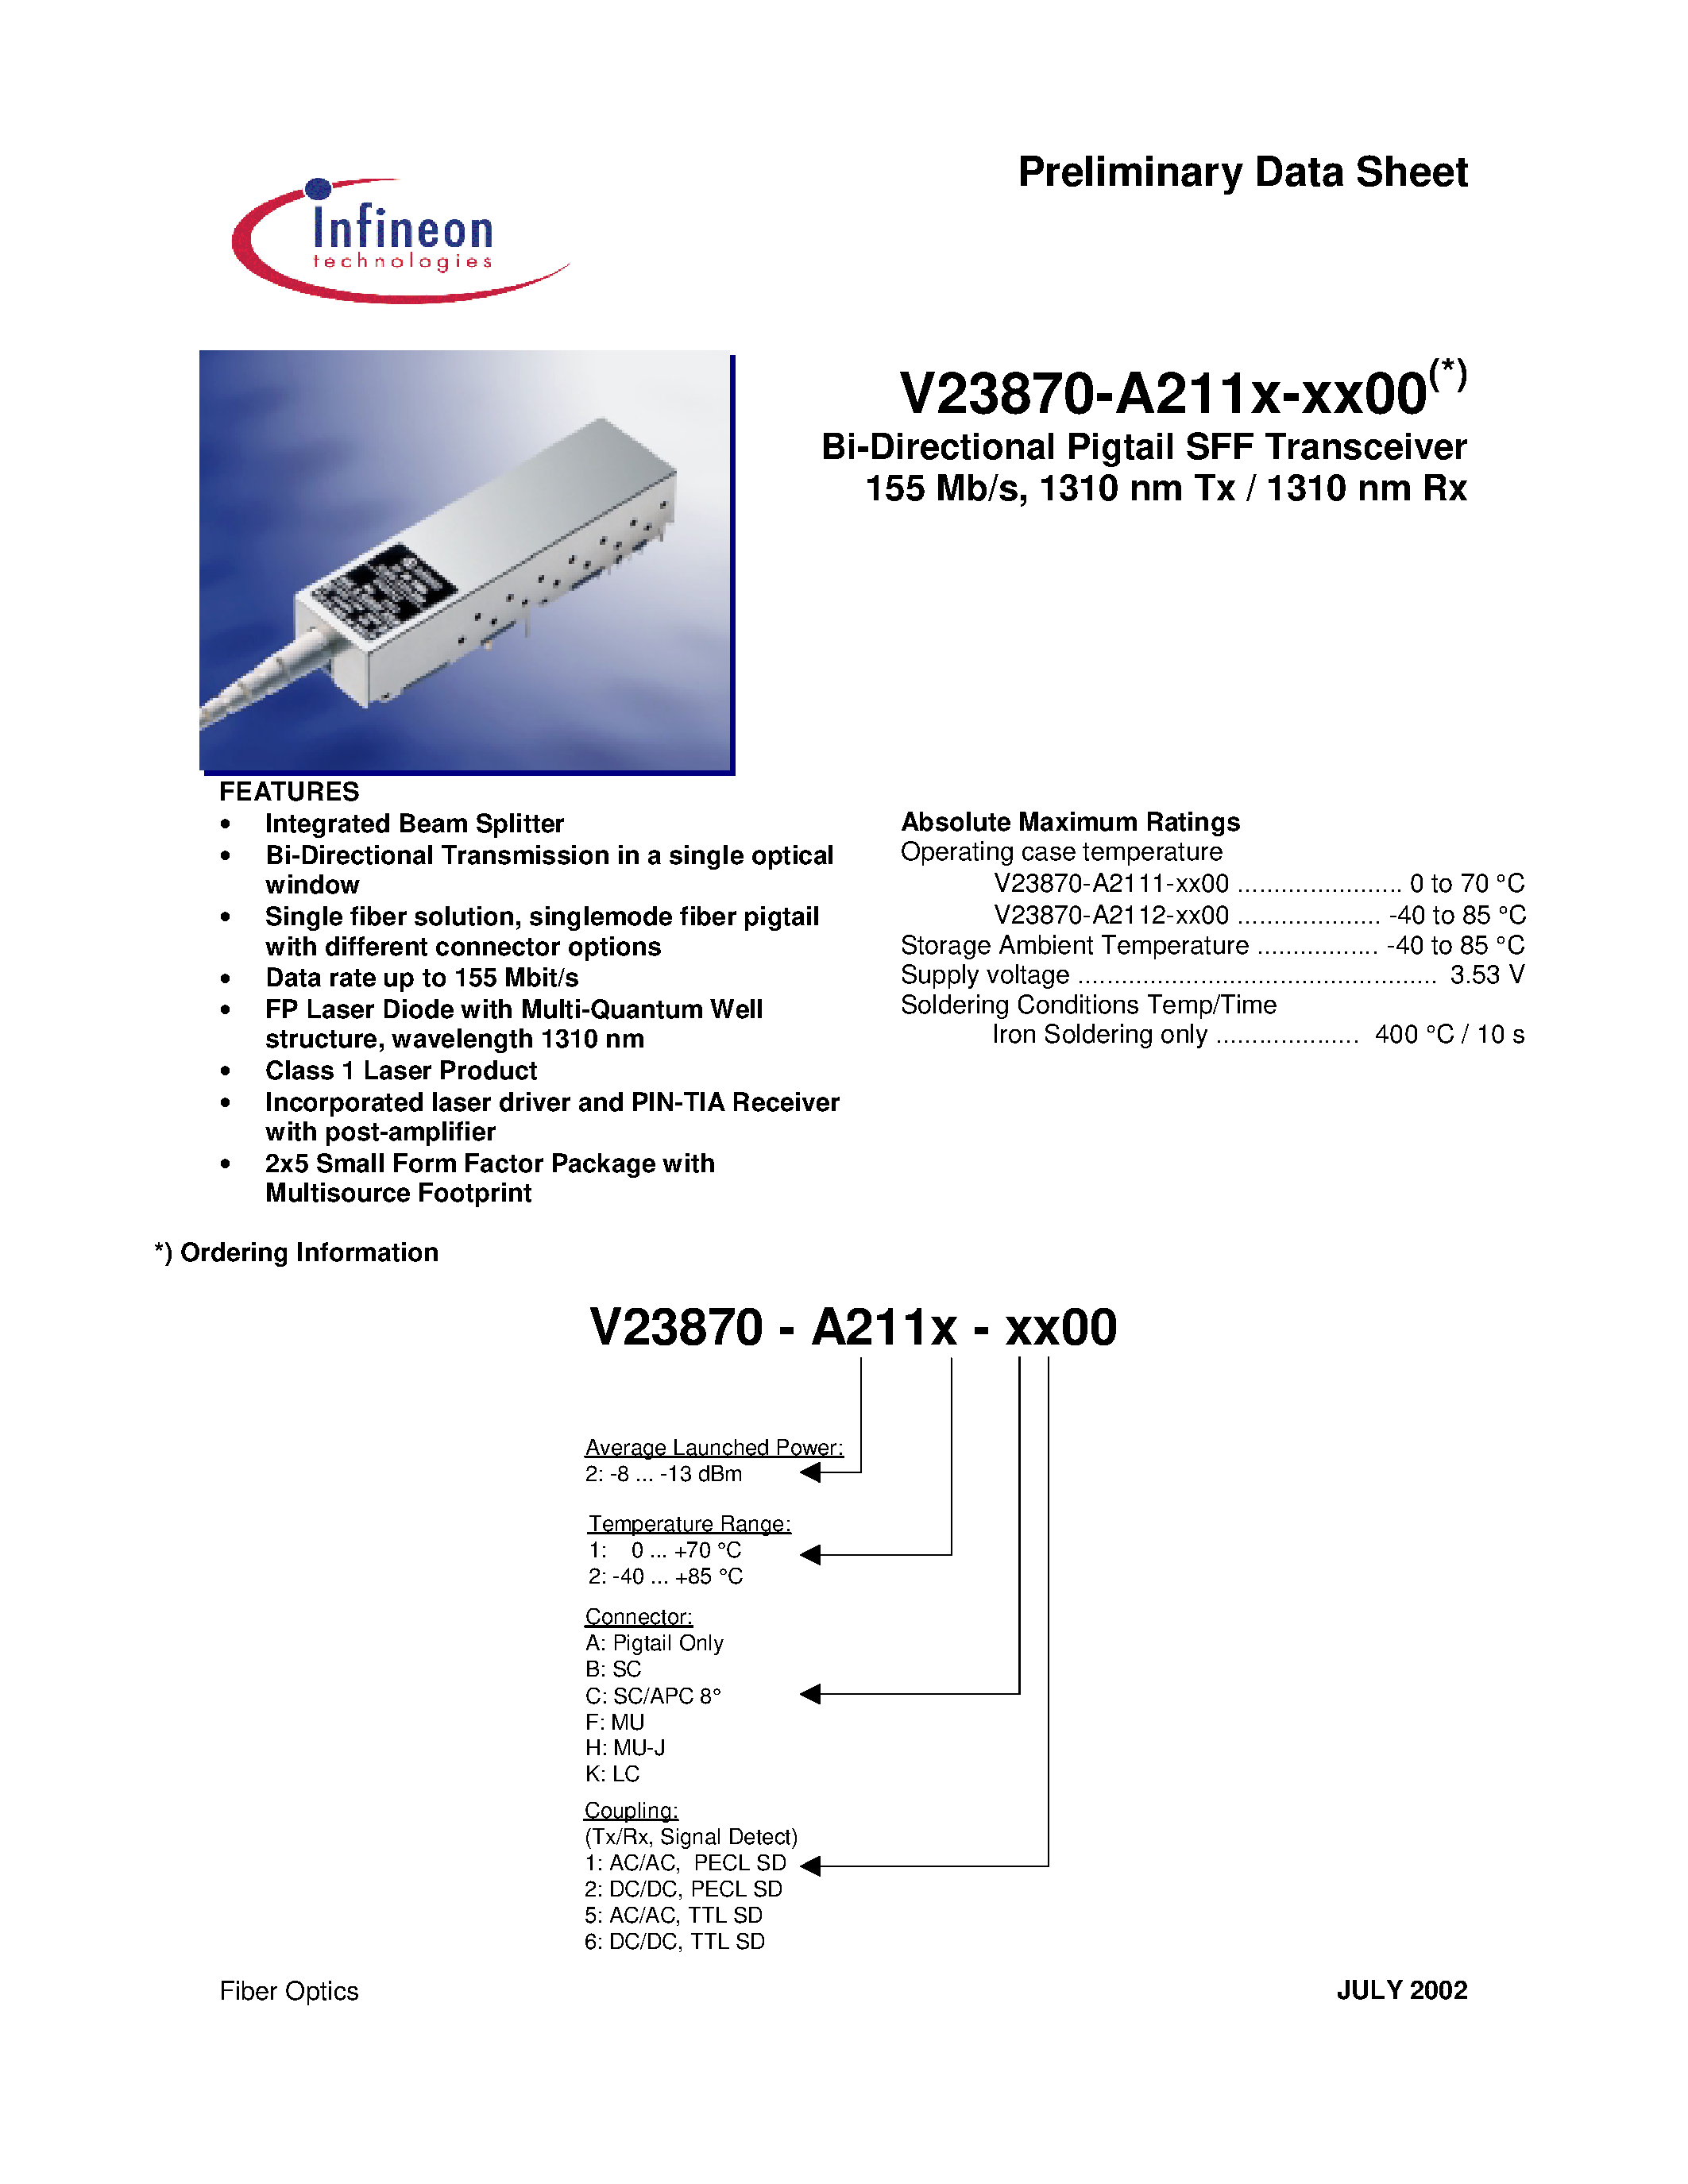 Datasheet V23870-A2112-H200 - Bi-Directional Pigtail SFF Transceiver 155 Mb/s/ 1310 nm Tx / 1310 nm Rx page 1